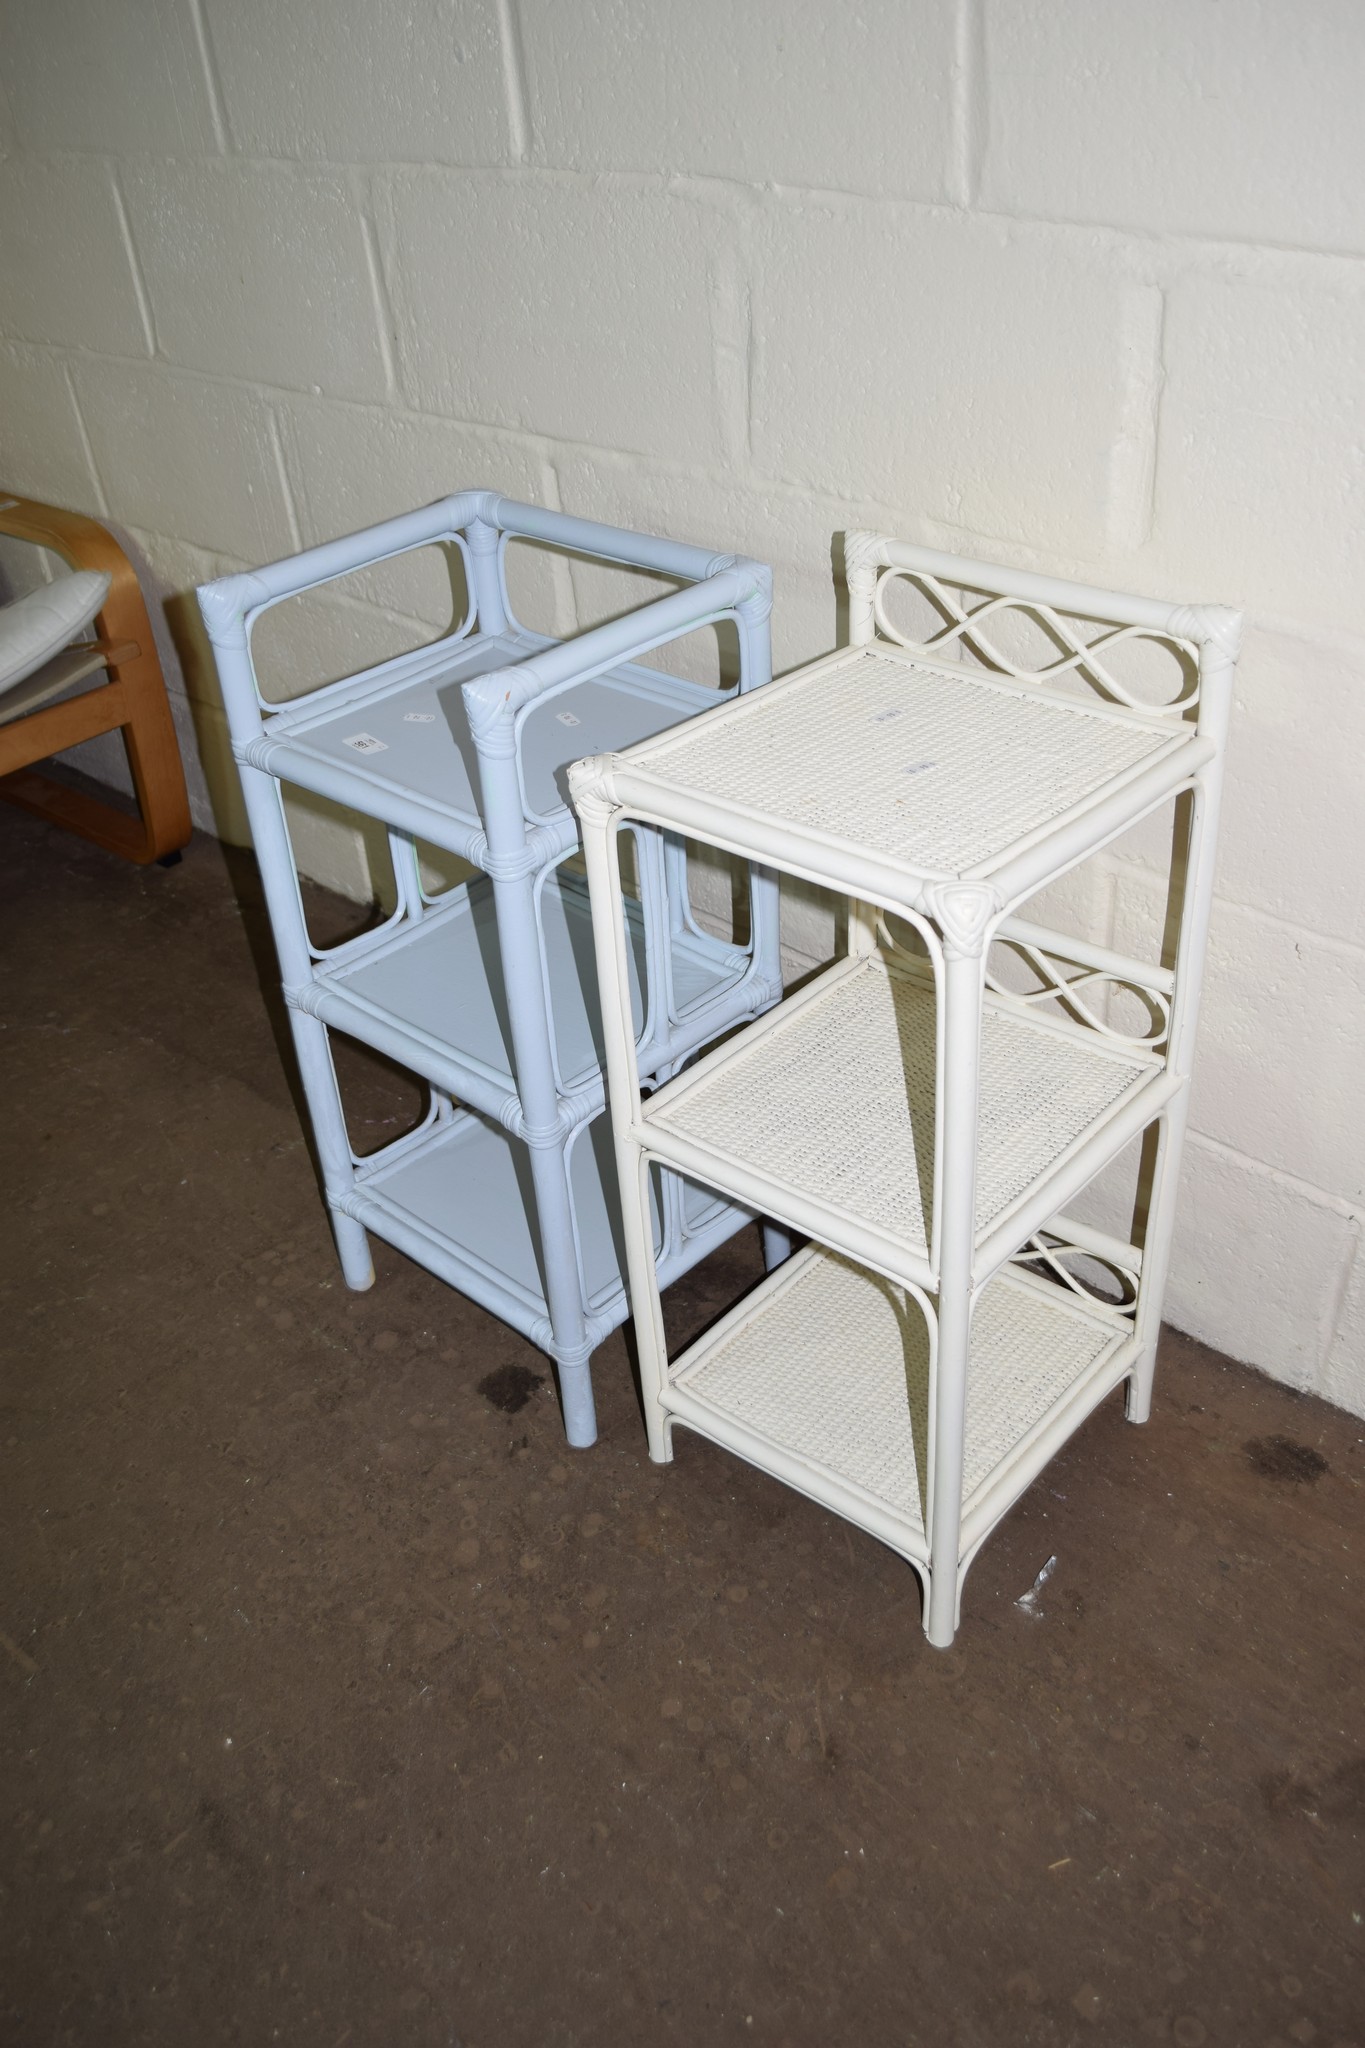 TWO SMALL PAINTED BATHROOM UNITS EACH WIDTH APPROX 33CM - Image 2 of 2